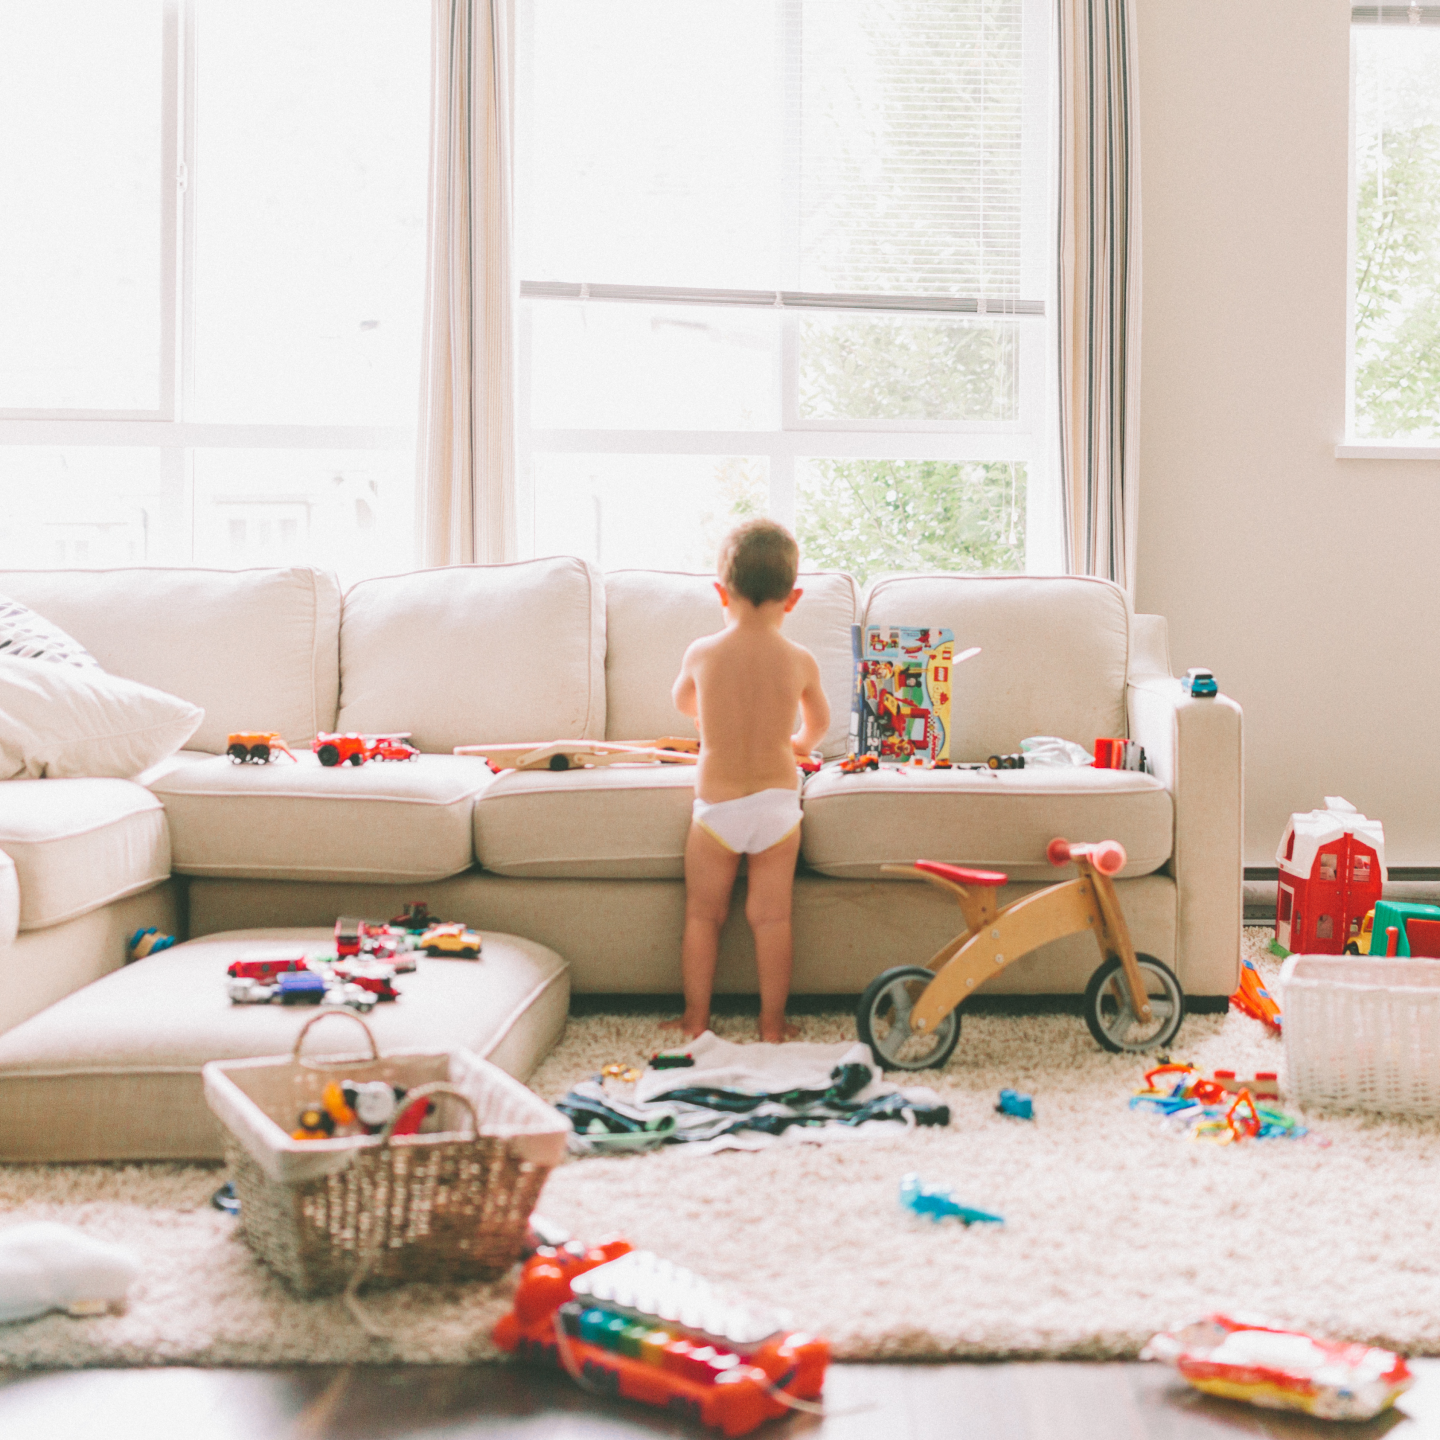 Child surrounded by toys in messy living room